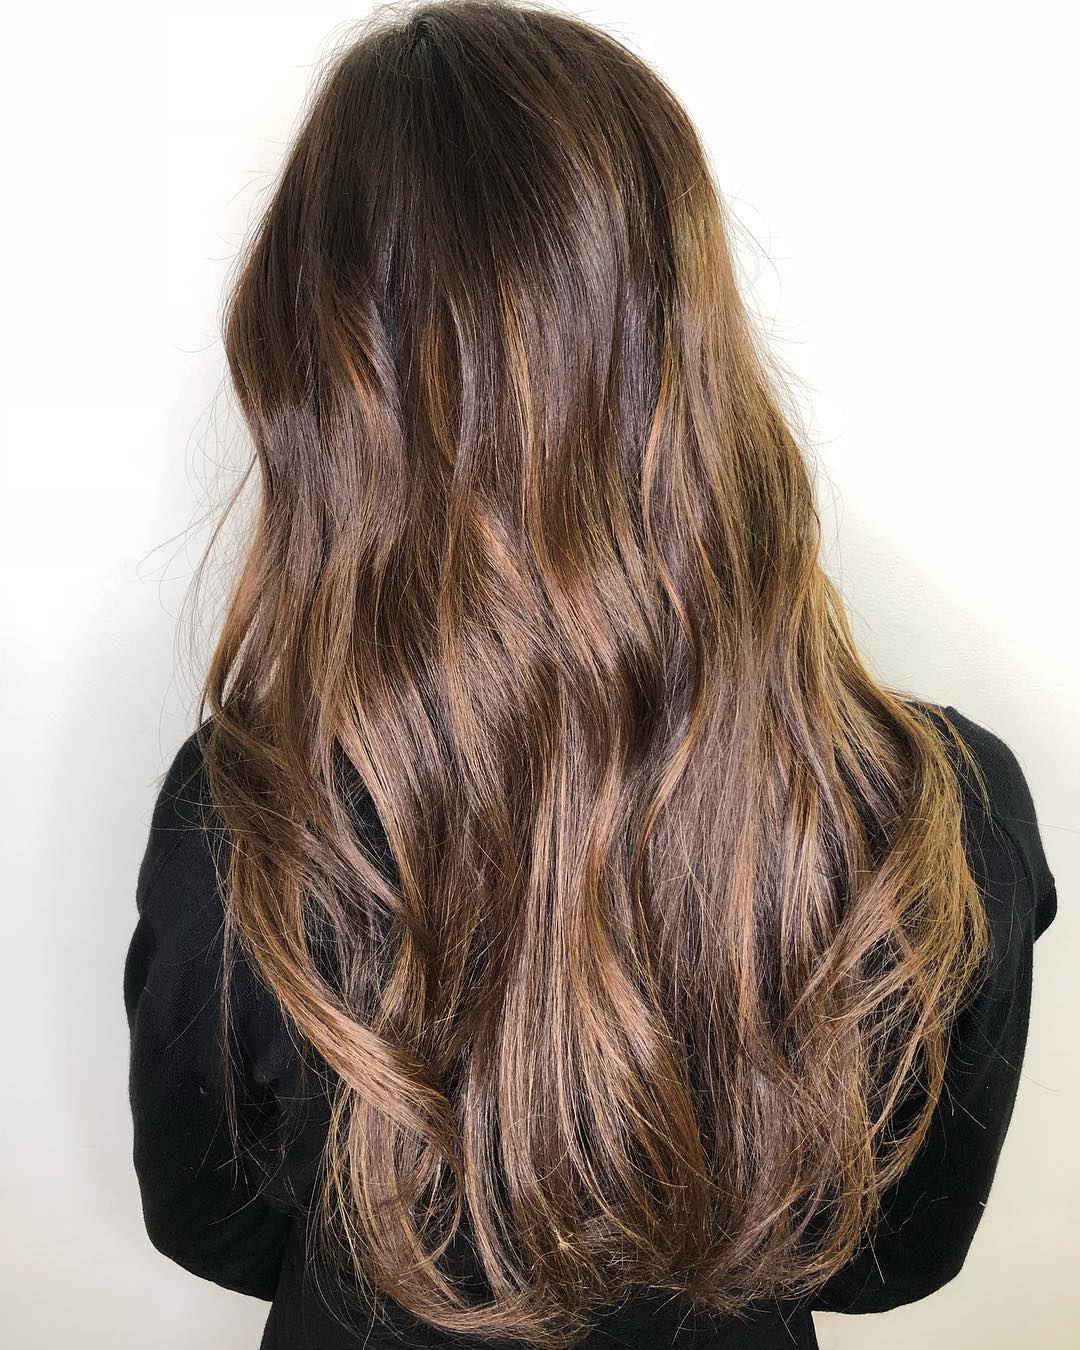 back of womans head showing long shiny brown hair after using to112 products